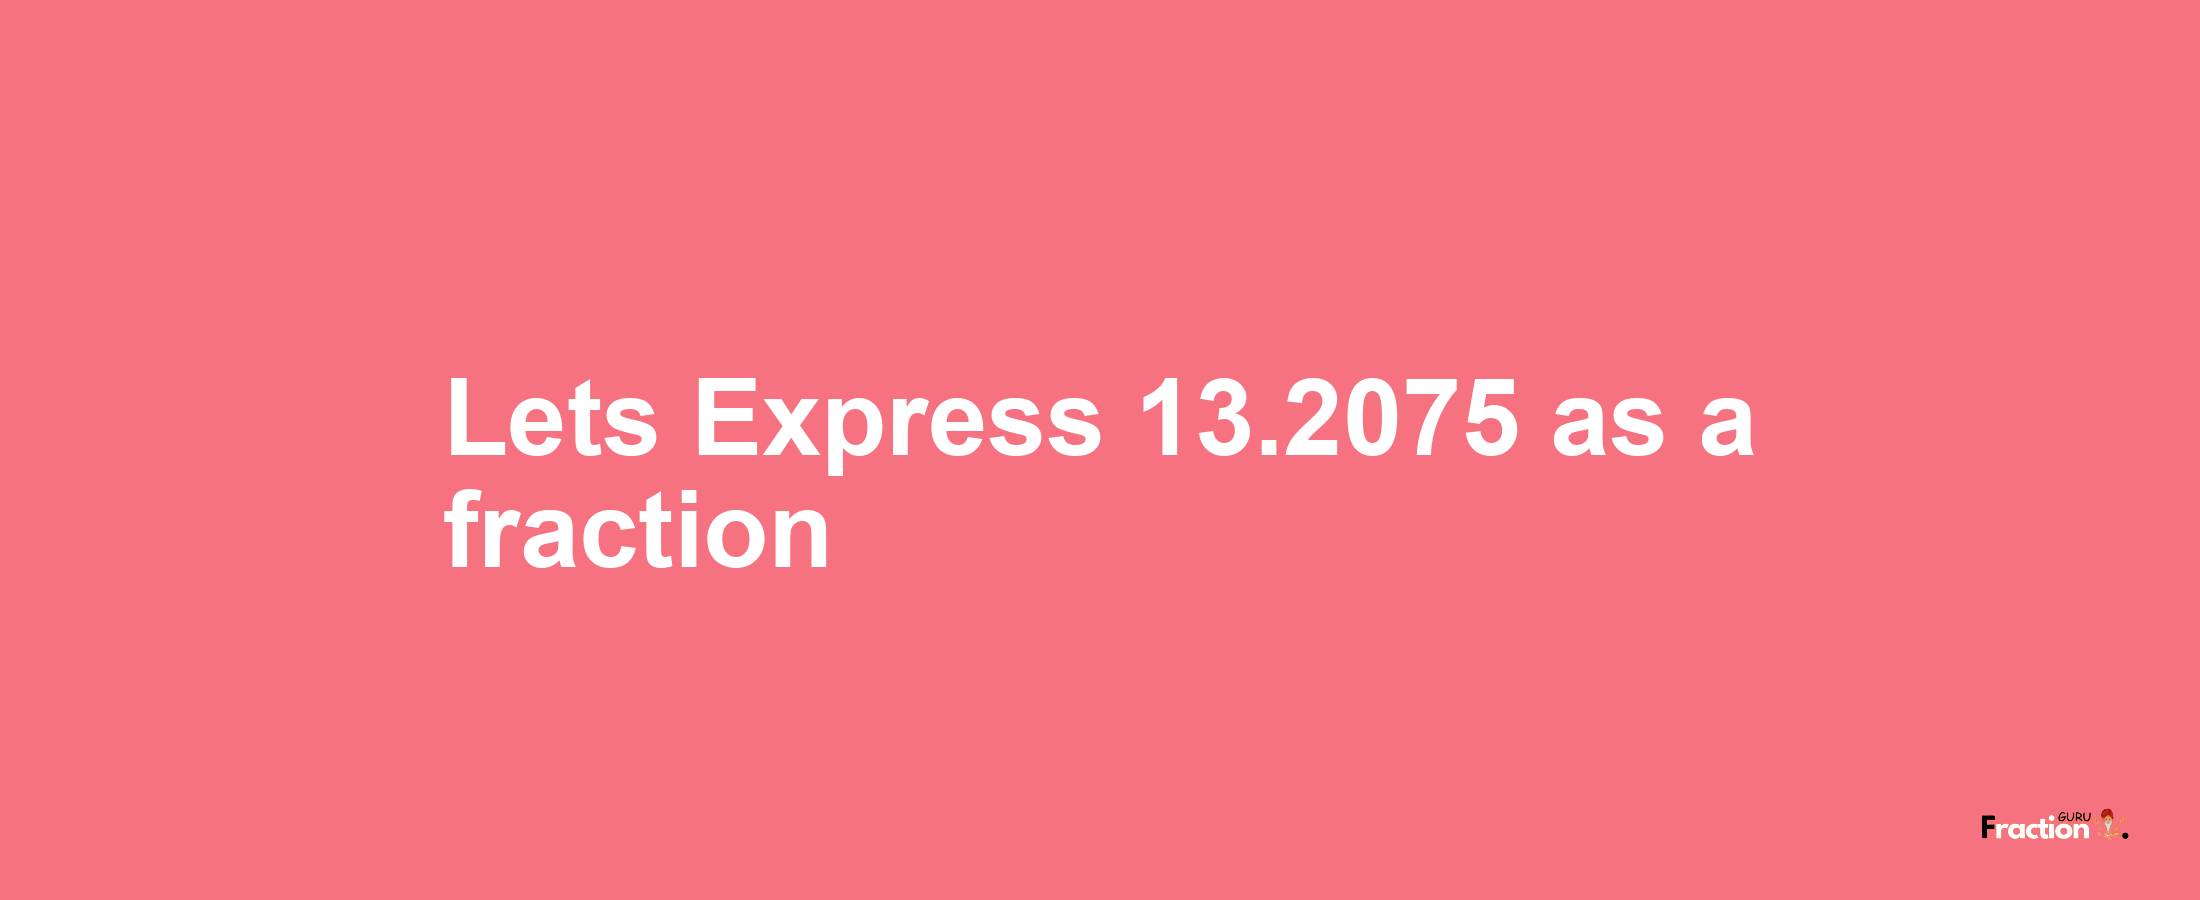 Lets Express 13.2075 as afraction